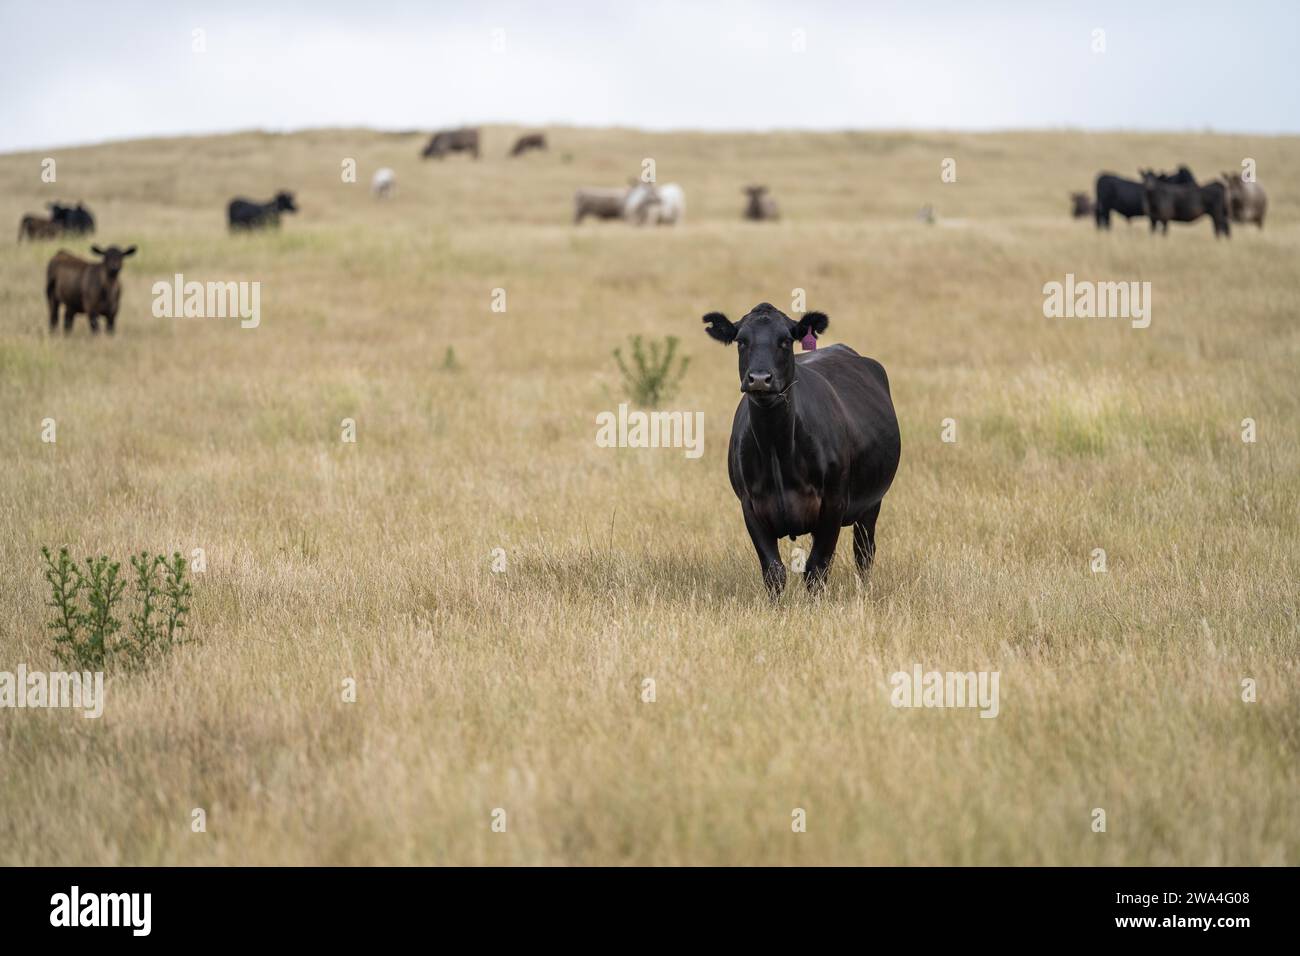 Portrait of cows in a field. Herd of cattle close up. White and brown cows. Australian Sustainable Beef steers on a agricultural farm in Australia Stock Photo